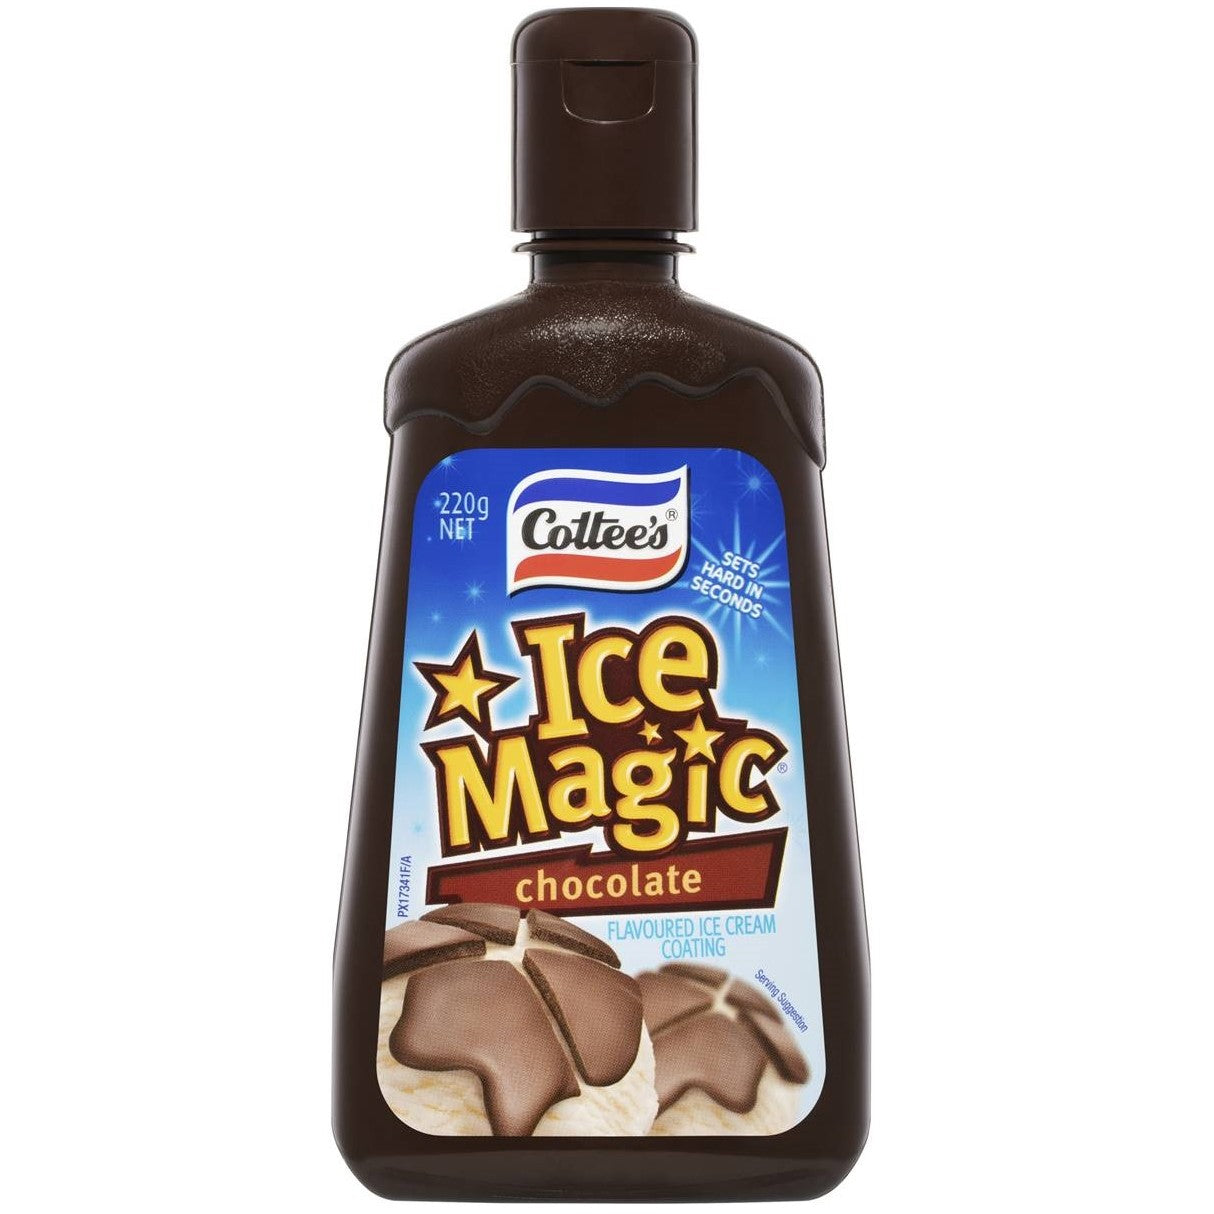 Cottee's Ice Magic Chocolate Topping 220g